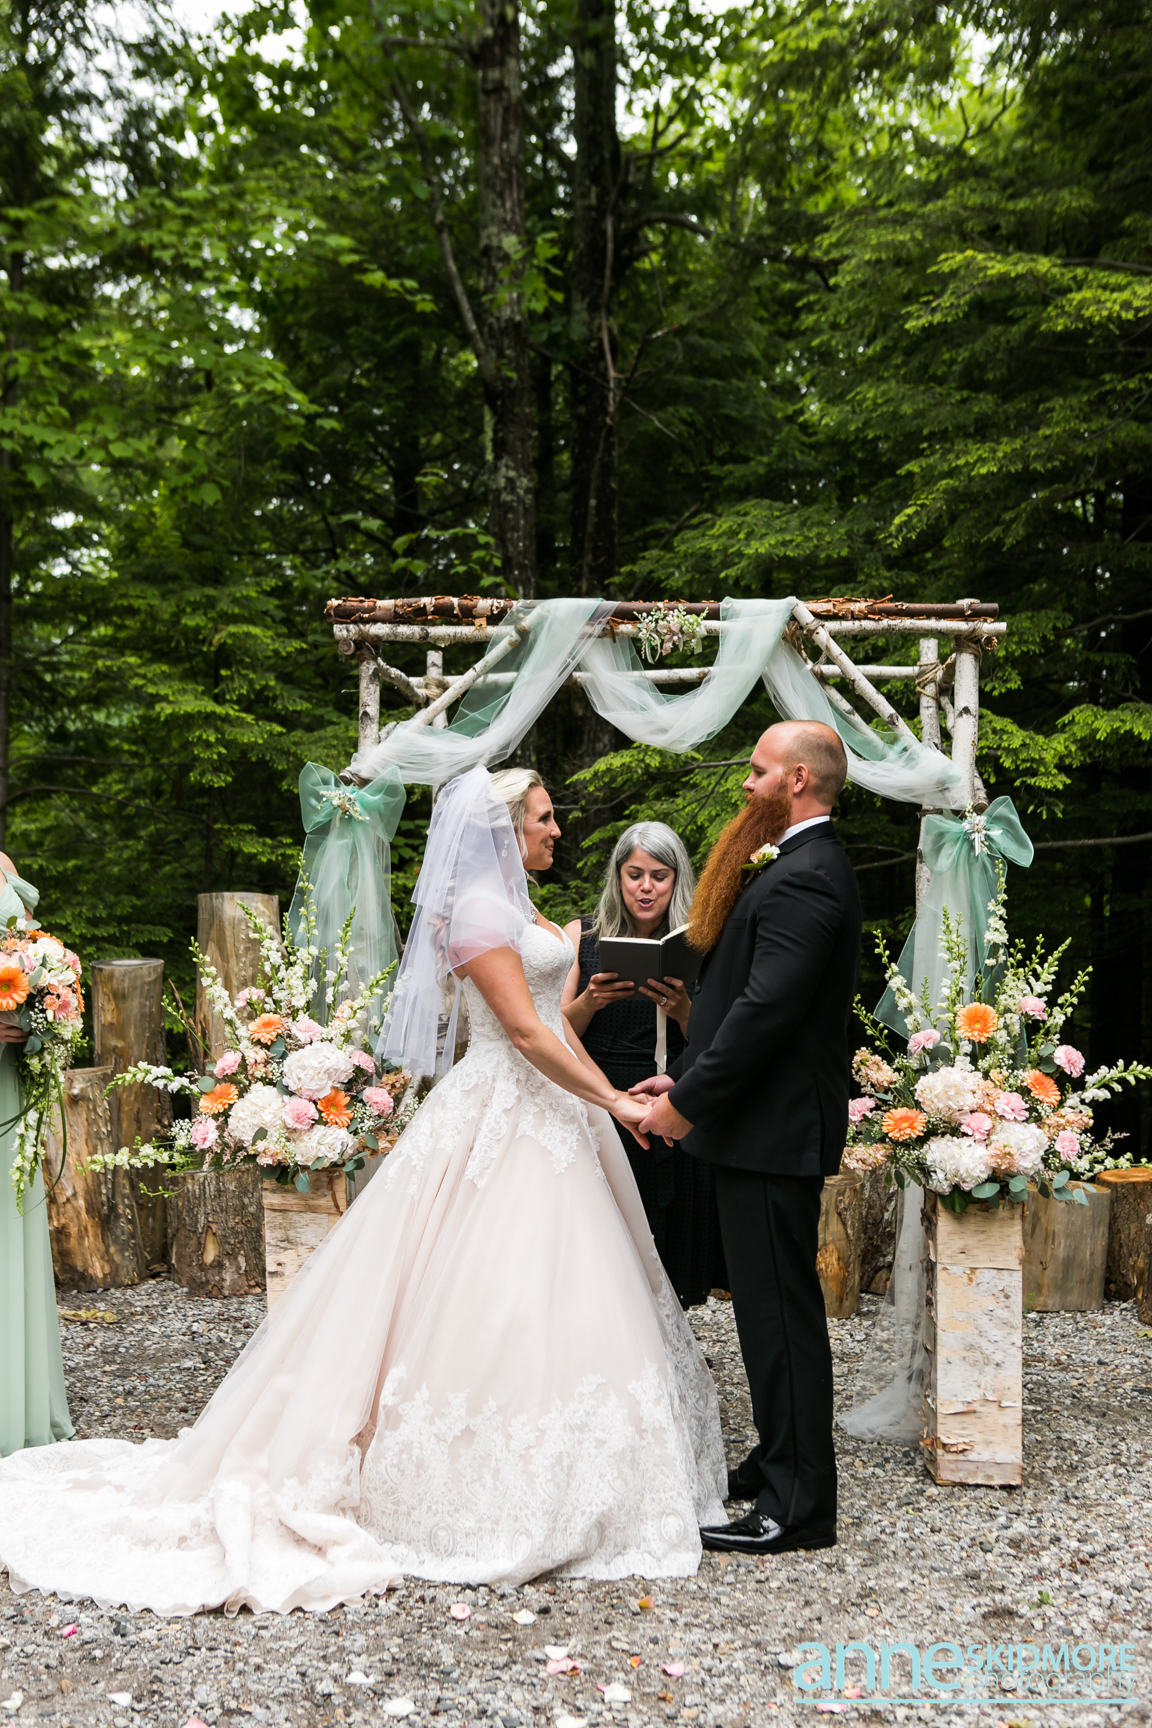 Mark and Barbie say I do at a rustic barn wedding in Norway, Maine officiated by A Sweet Start. Photo by Anne Skidmore Photography